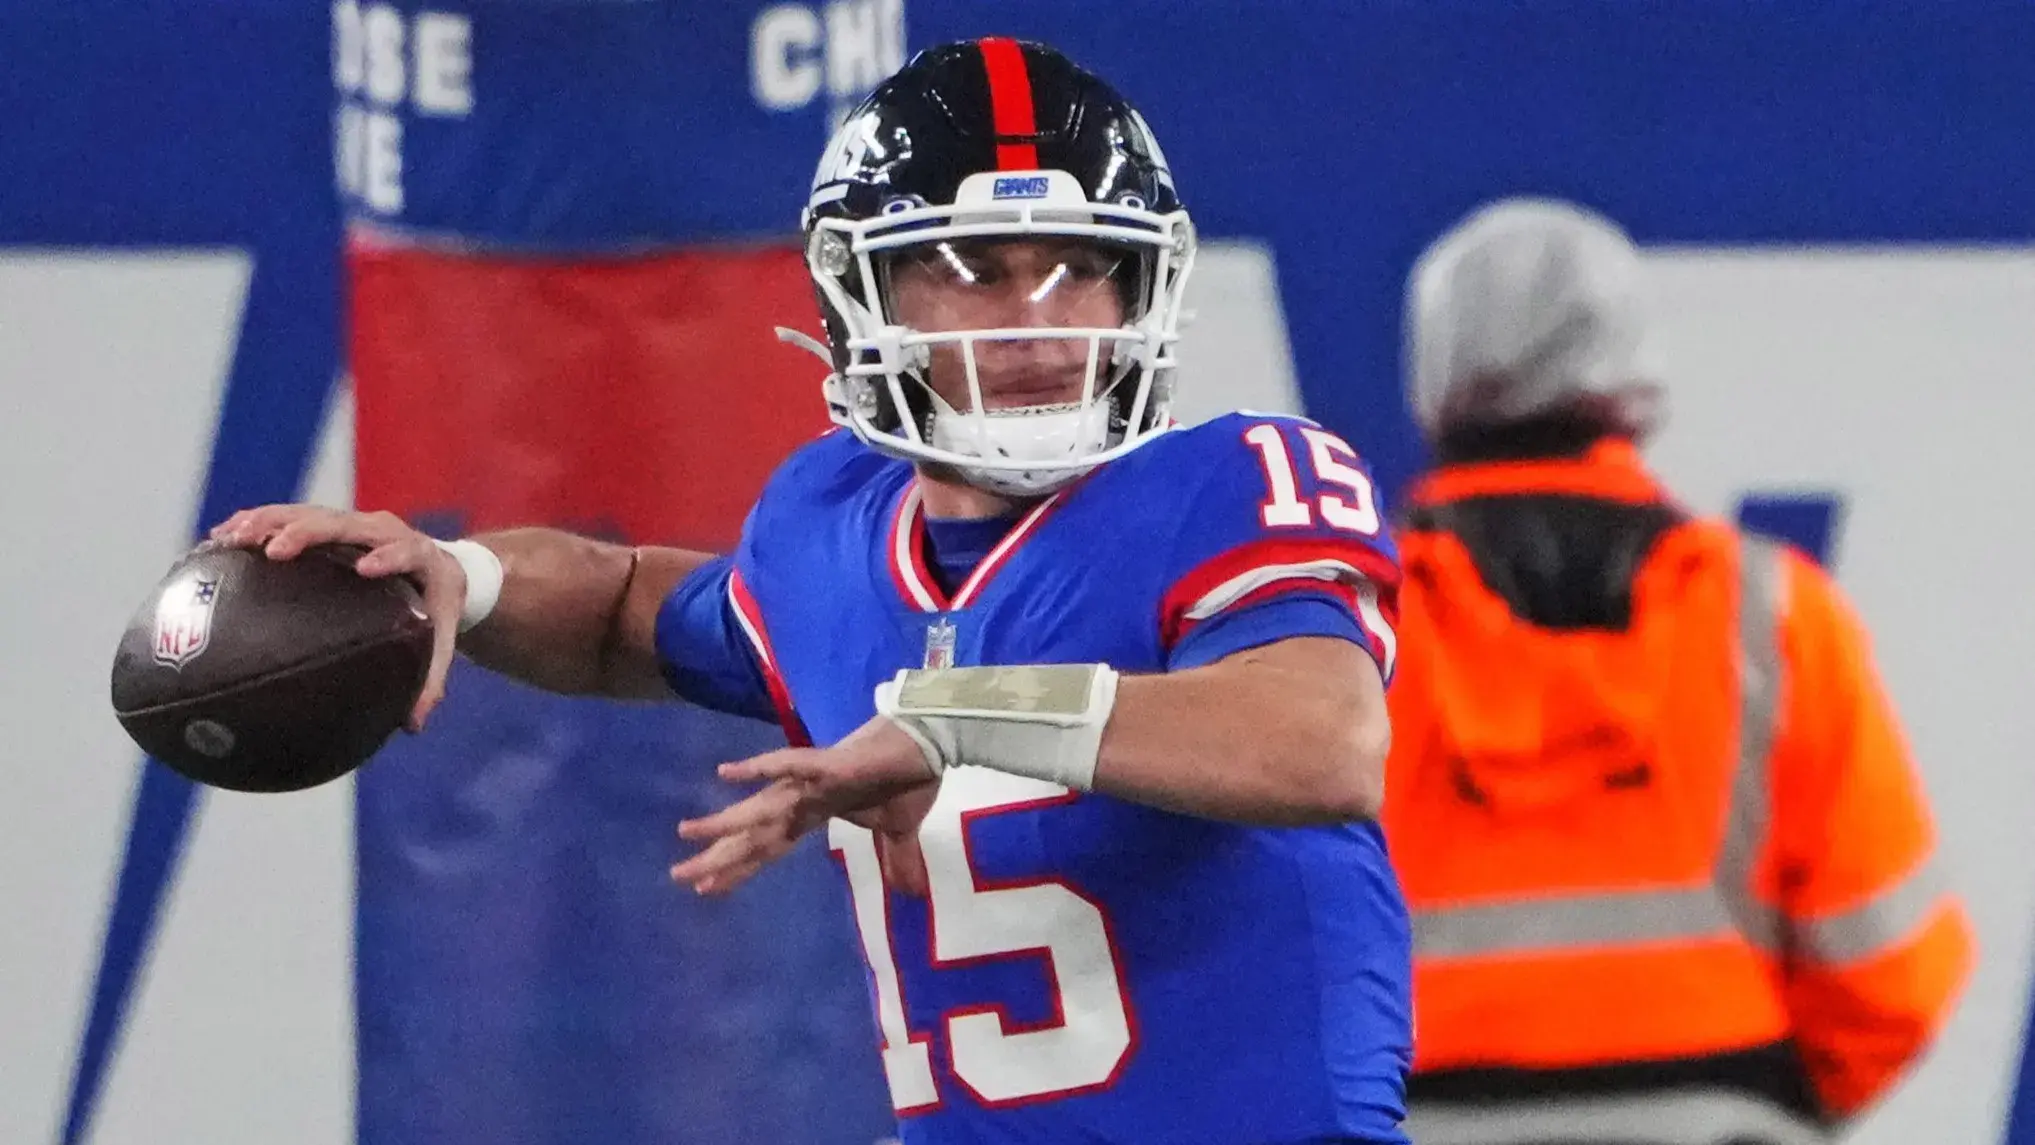 Dec 11, 2023; East Rutherford, New Jersey, USA; New York Giants quarterback Tommy DeVito (15) throws a pass during the first quarter against the Green Bay Packers at MetLife Stadium. Mandatory Credit: Robert Deutsch-USA TODAY Sports / © Robert Deutsch-USA TODAY Sports